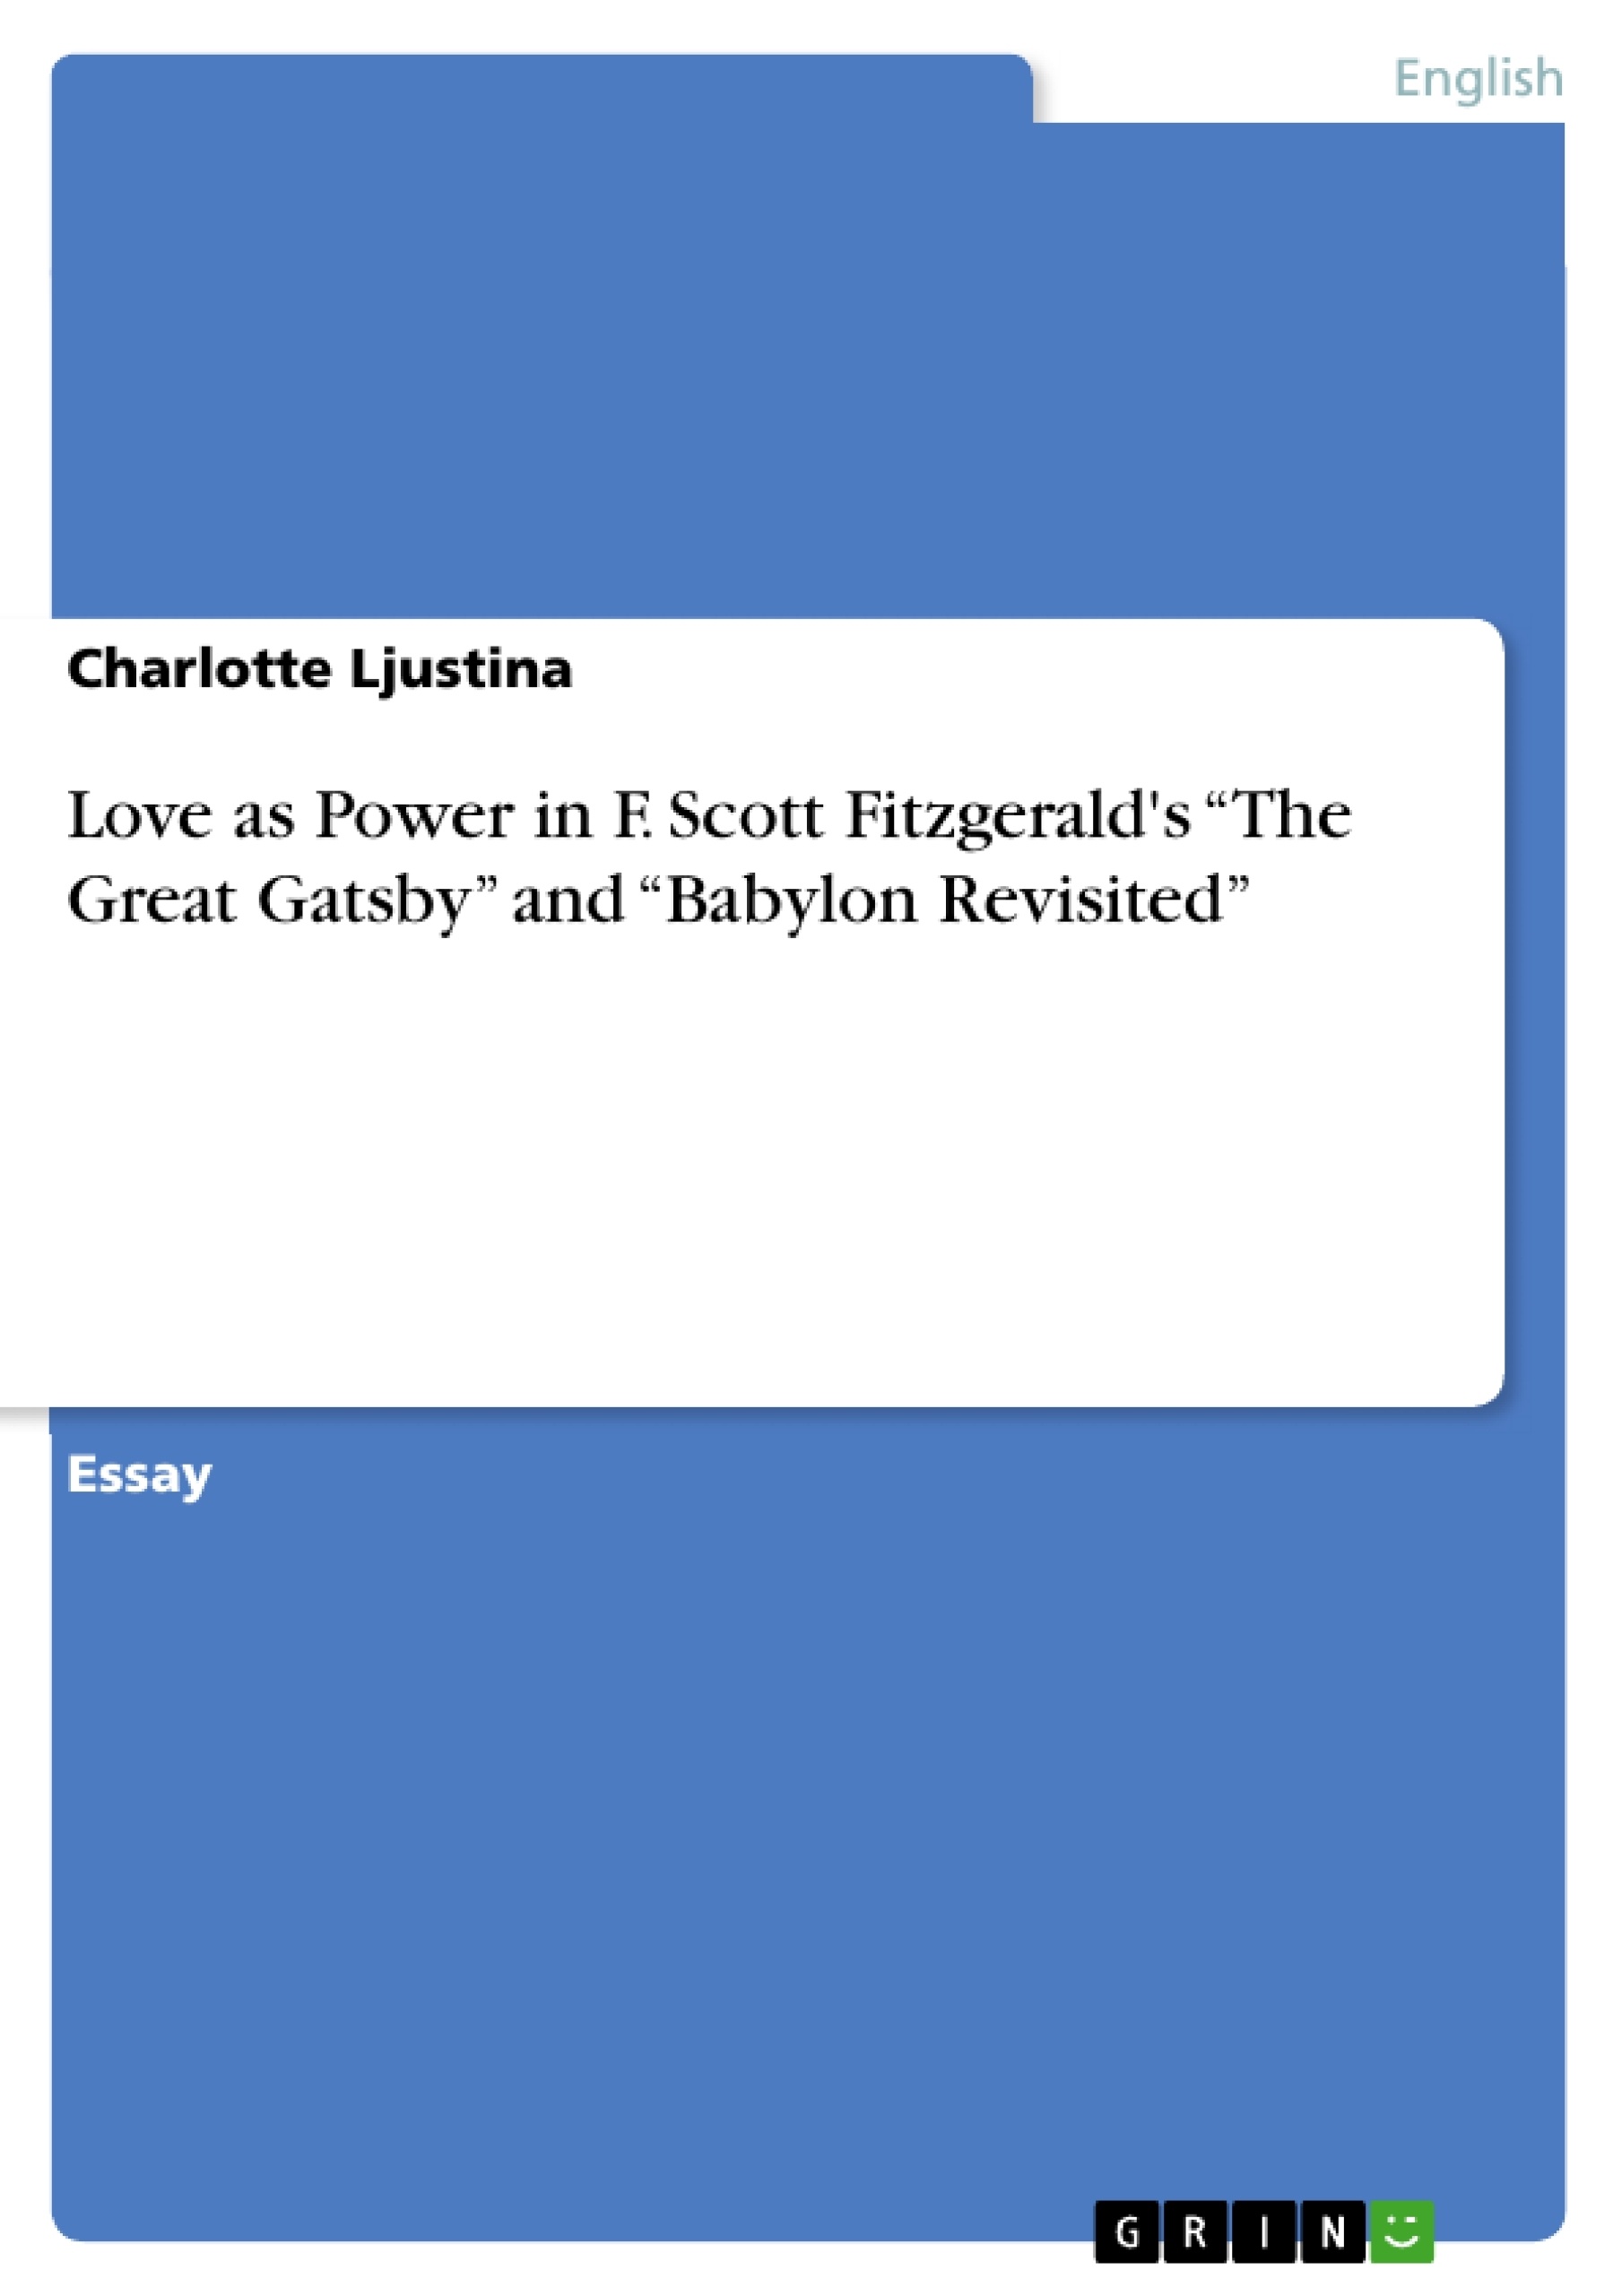 Título: Love as Power in F. Scott Fitzgerald's “The Great Gatsby” and “Babylon Revisited”